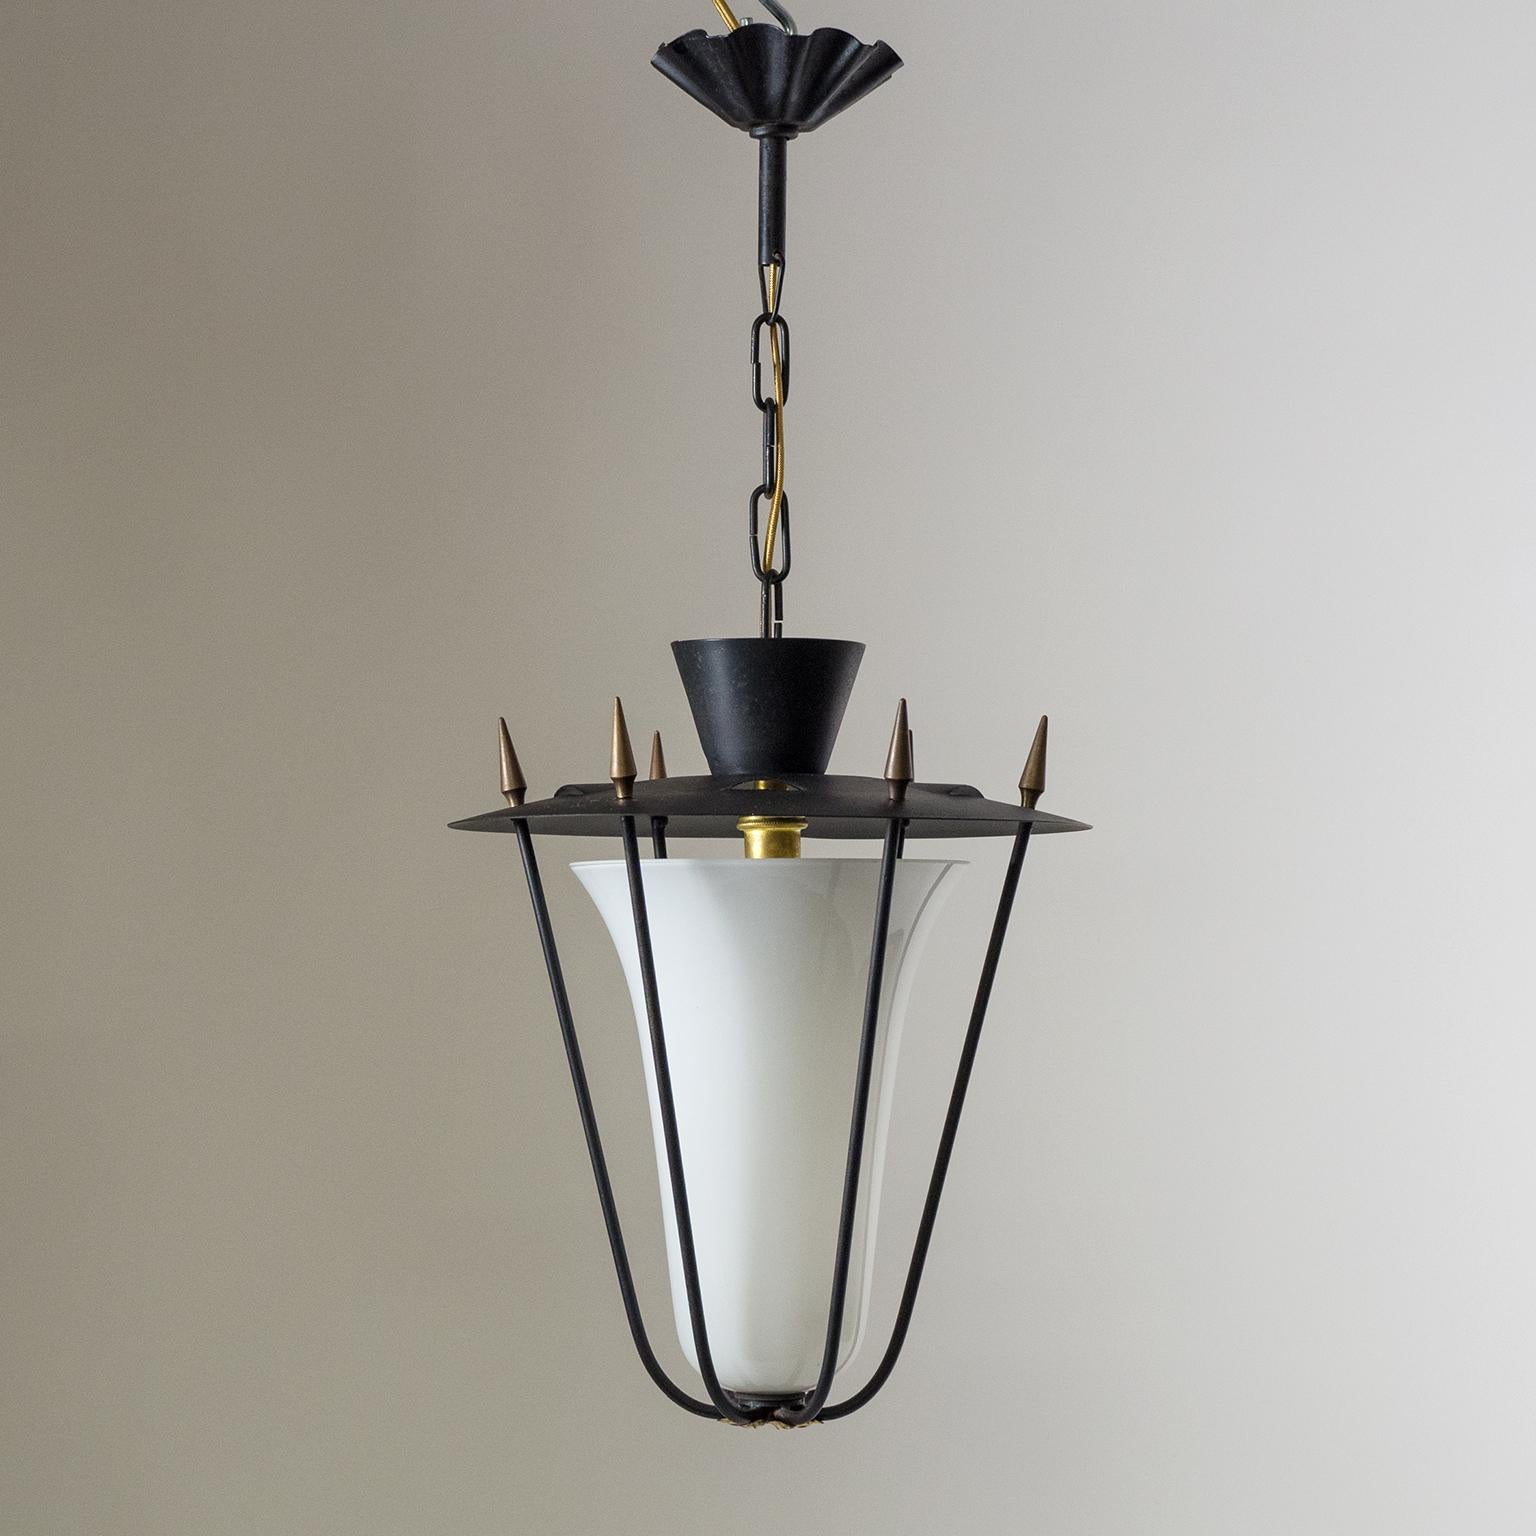 Mid-Century Modern 1950s French Lantern, Black and White with Brass Details